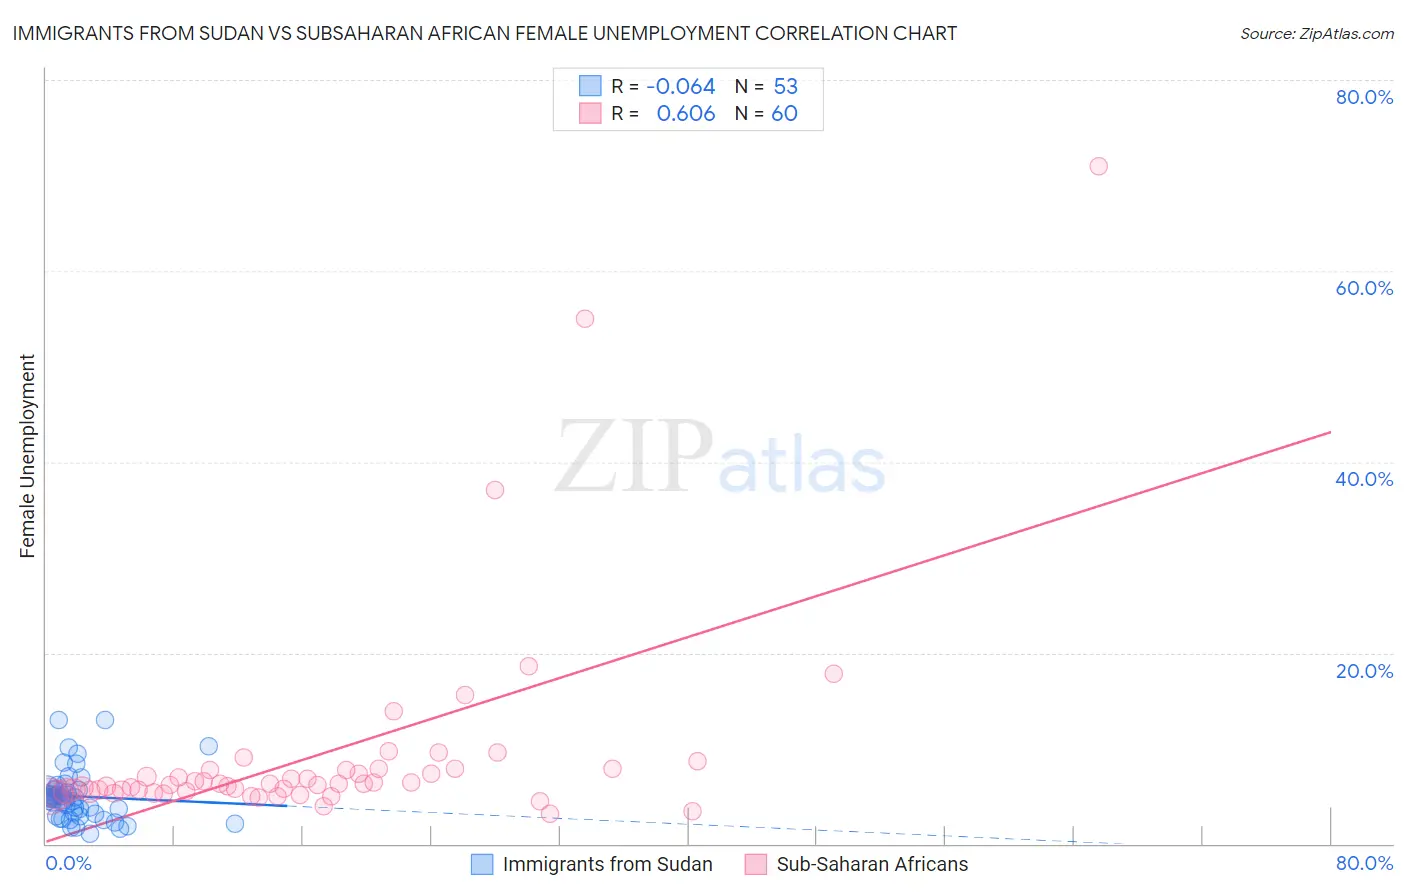 Immigrants from Sudan vs Subsaharan African Female Unemployment